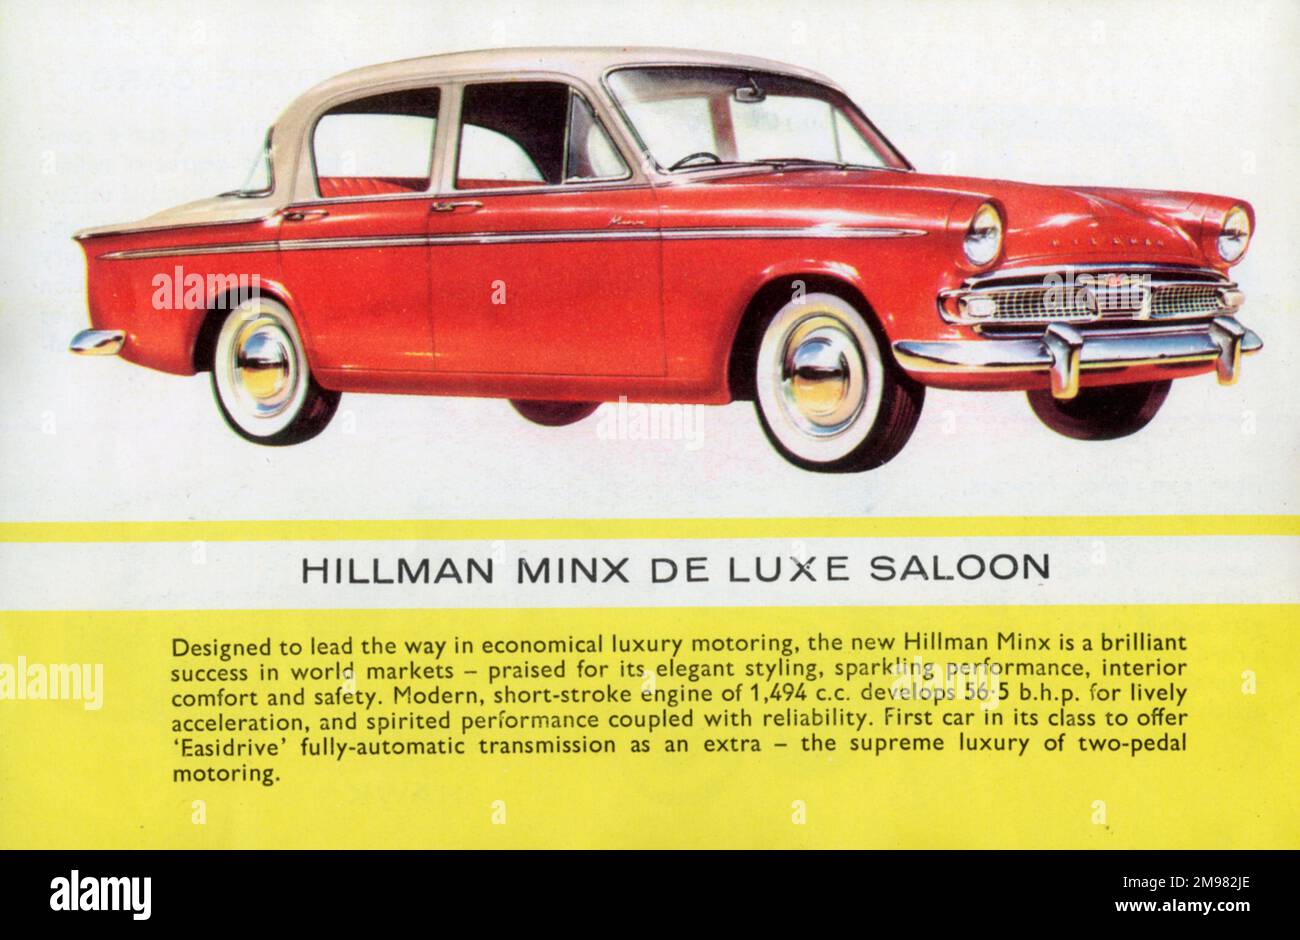 A Red Hillman Minx Deluxe saloon advertised in a Humber, Hillman and Sunbeam Rootes Motors Limited brochure. Stock Photo